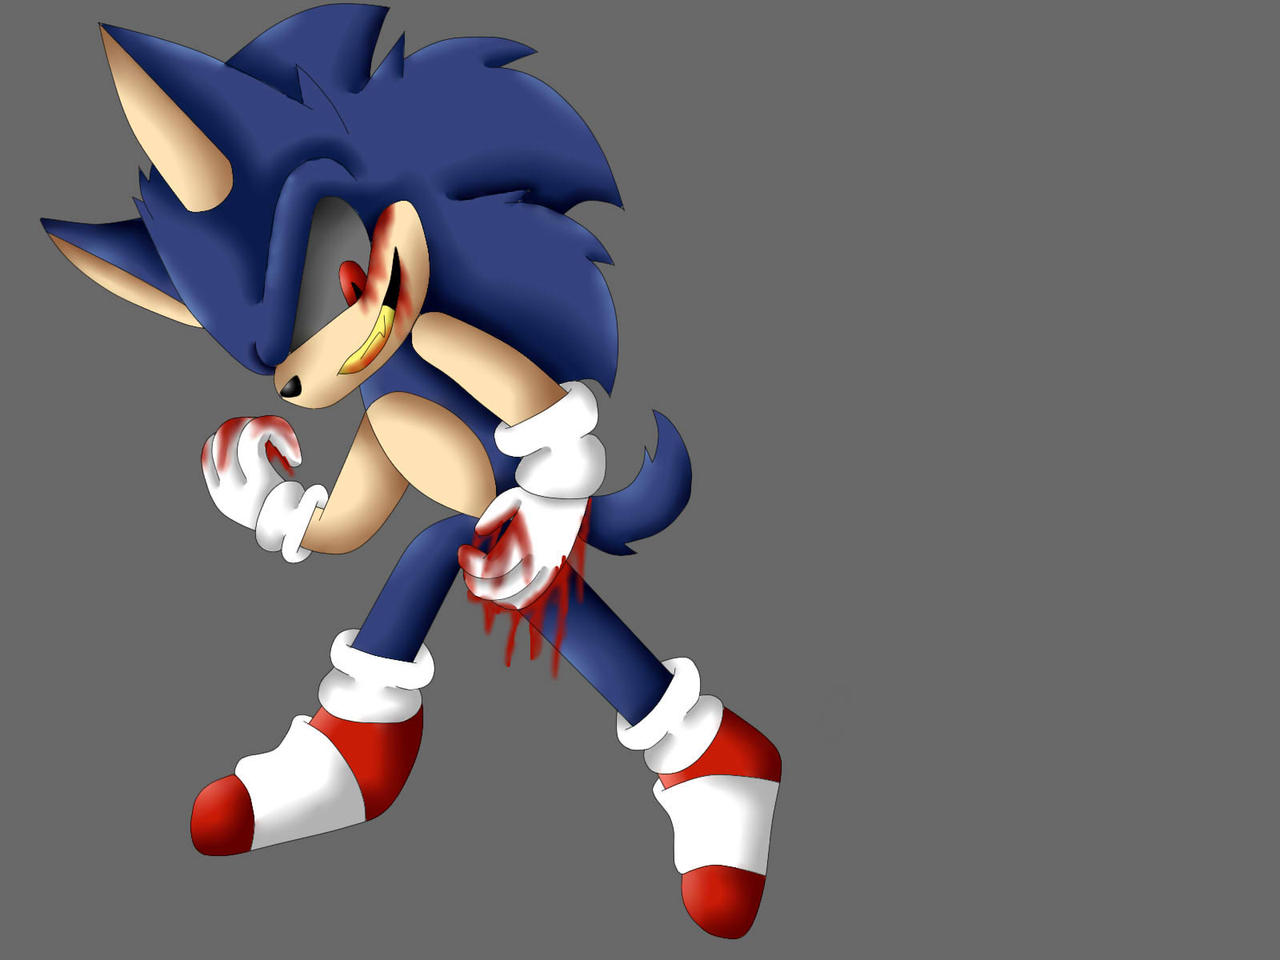 Gallery of Sonic Exe Model.